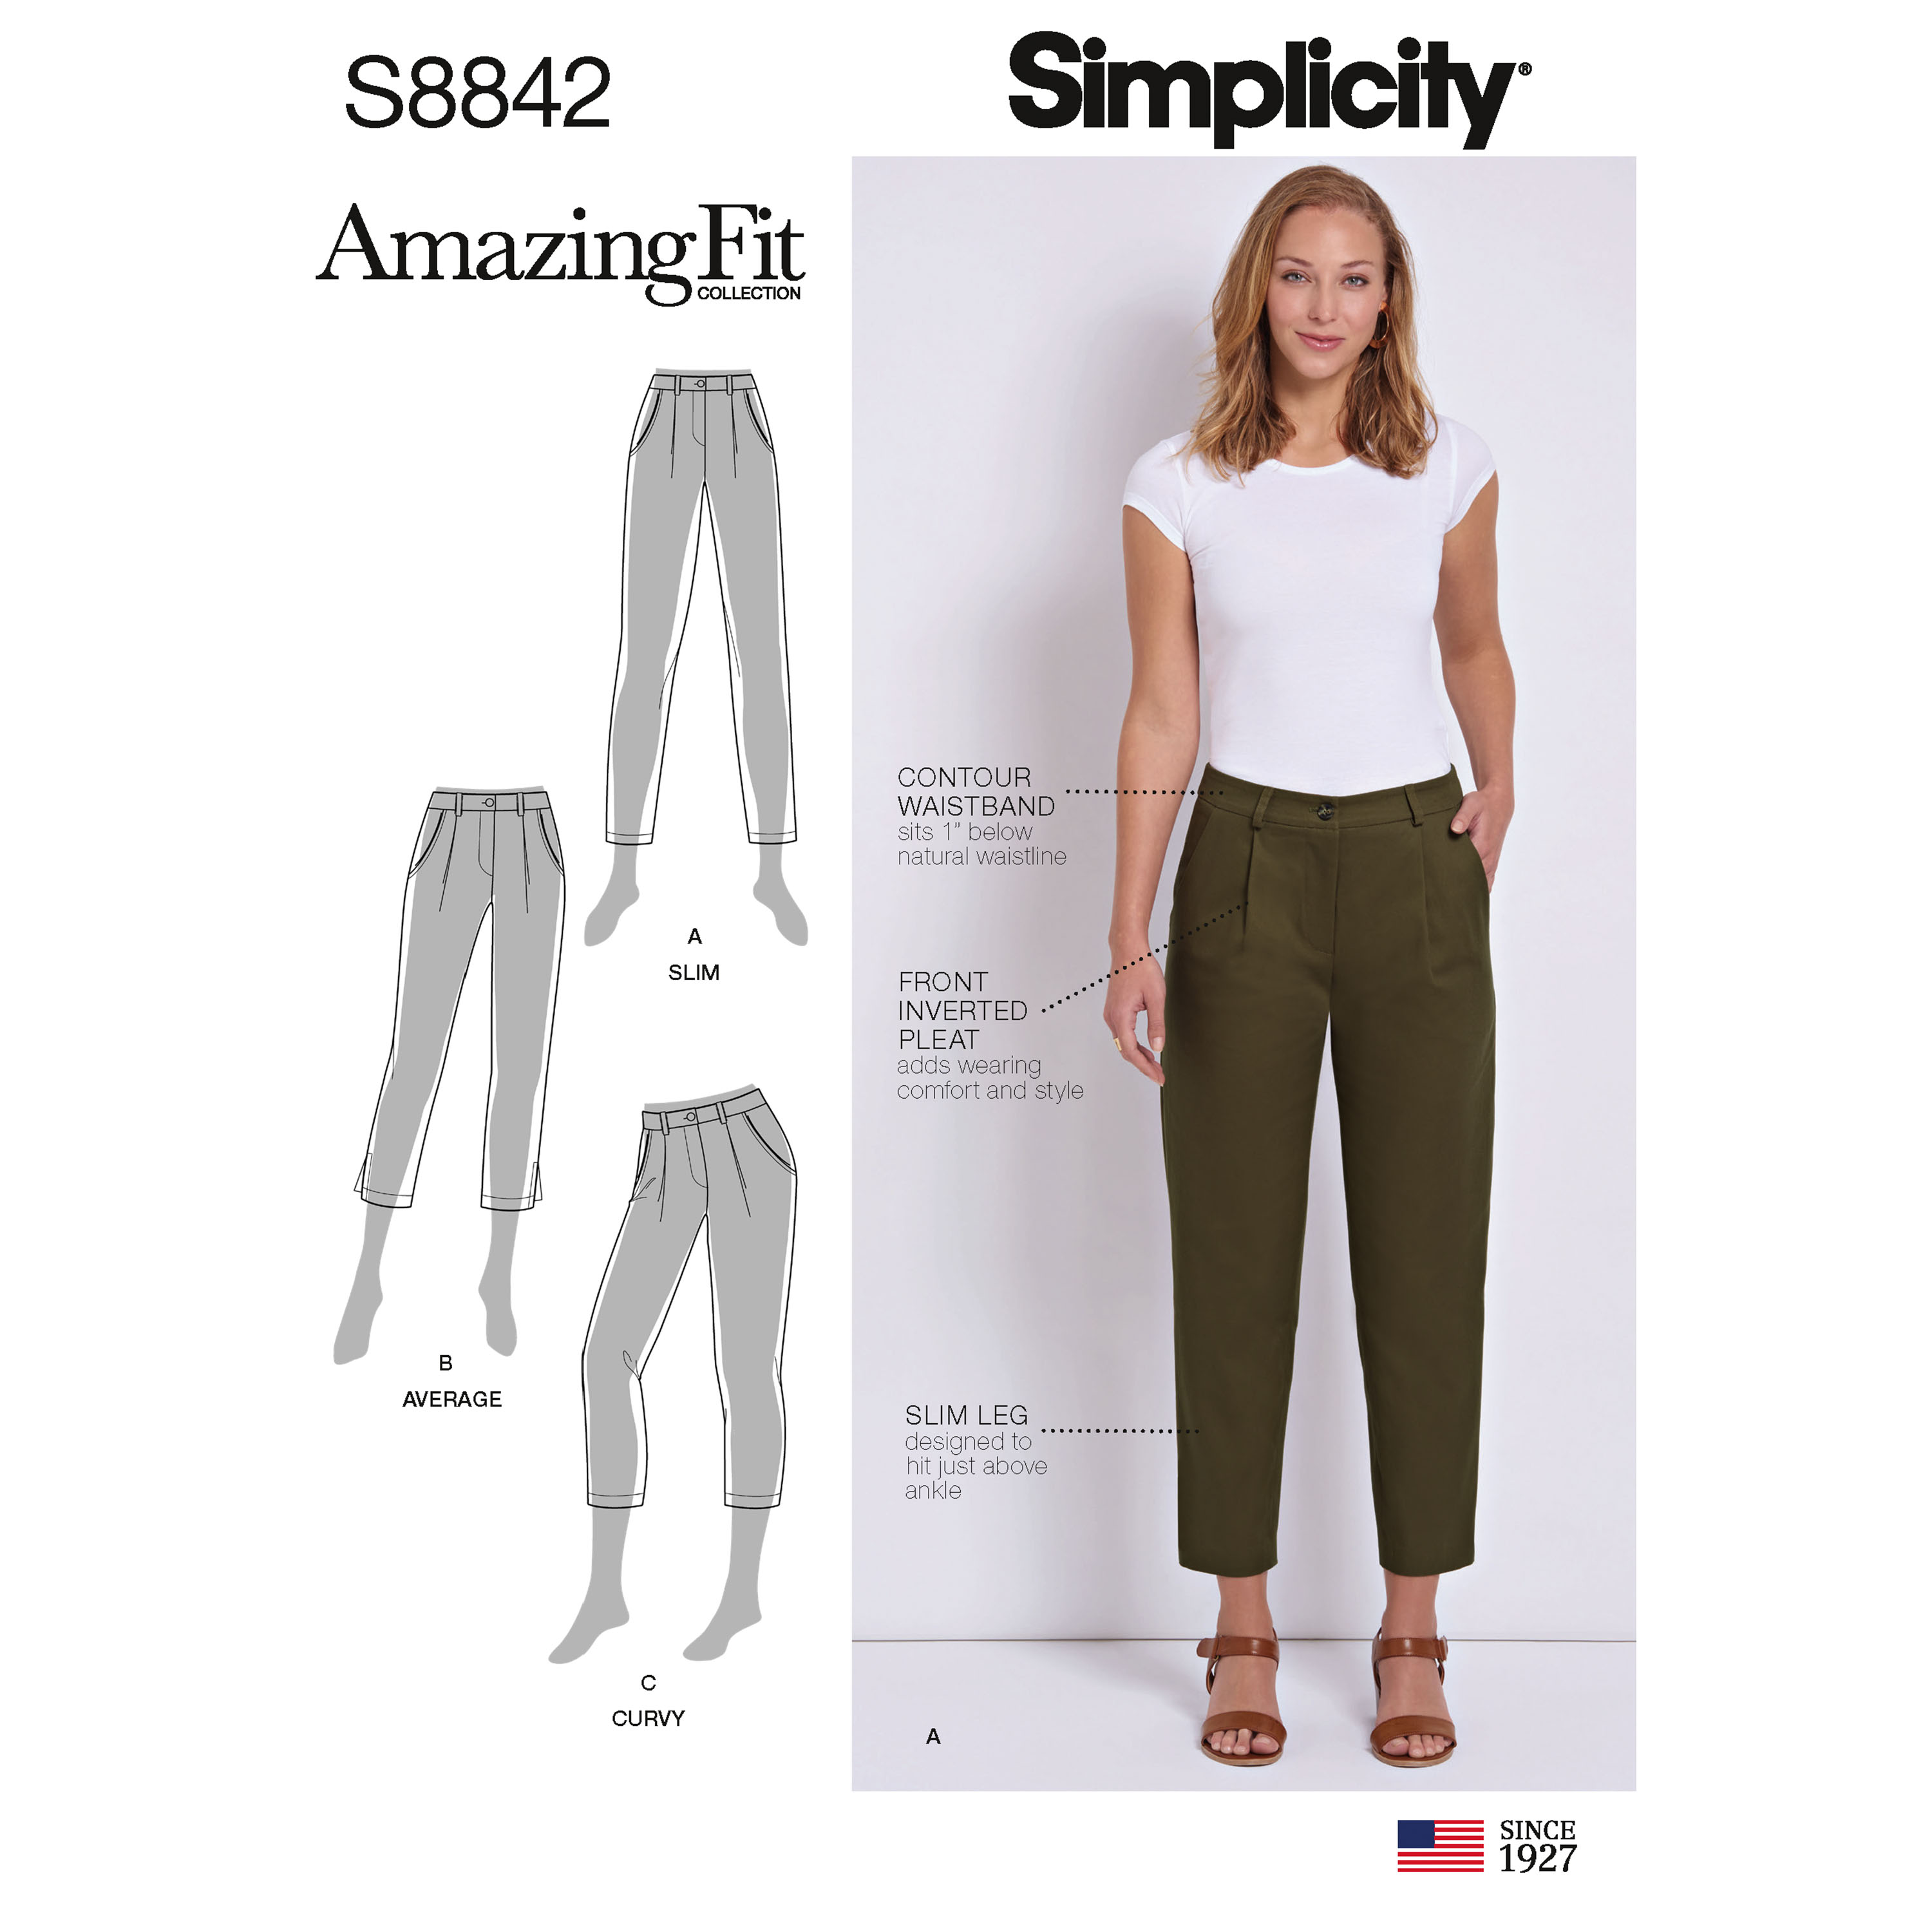 Uncut Simplicity sewing pattern 2080 Bag Pattern ~ Two Styles Interior  Zipper Pockets FF